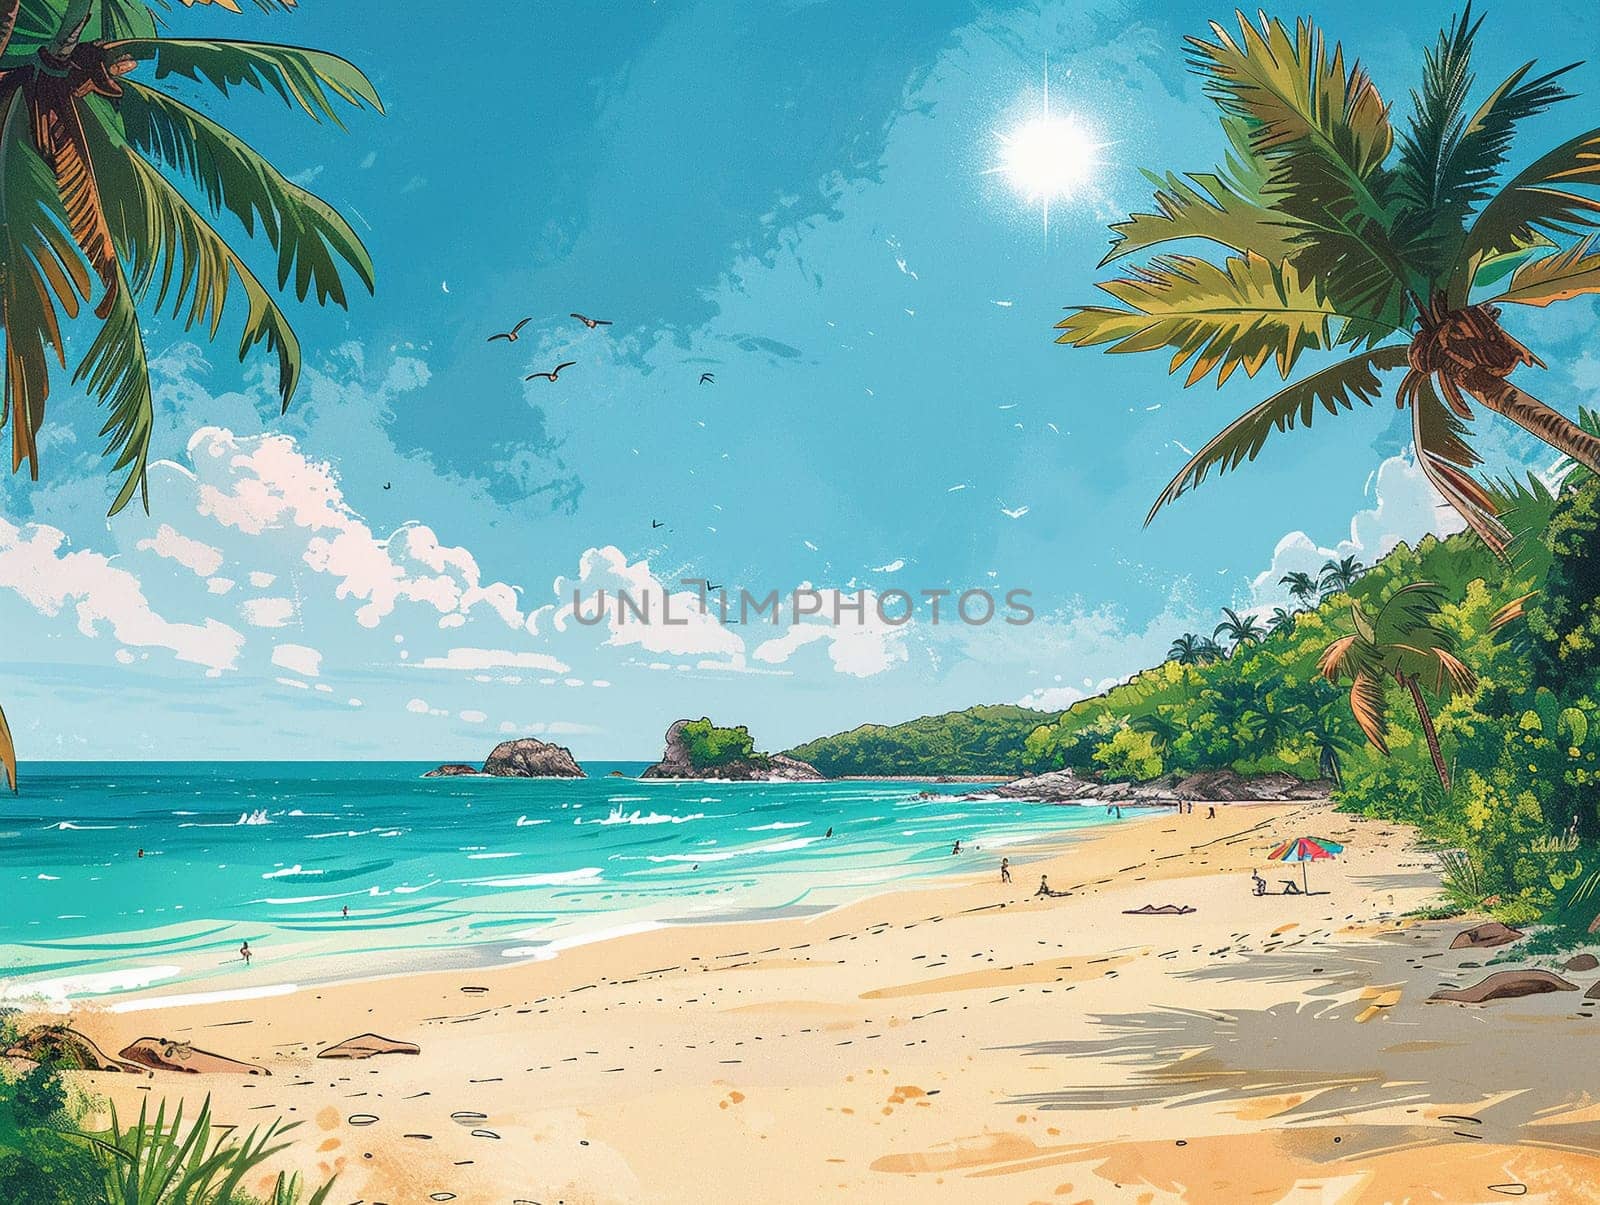 Cartoon illustration of a lively beach day, designed with cute characters and bright, sunny colors.